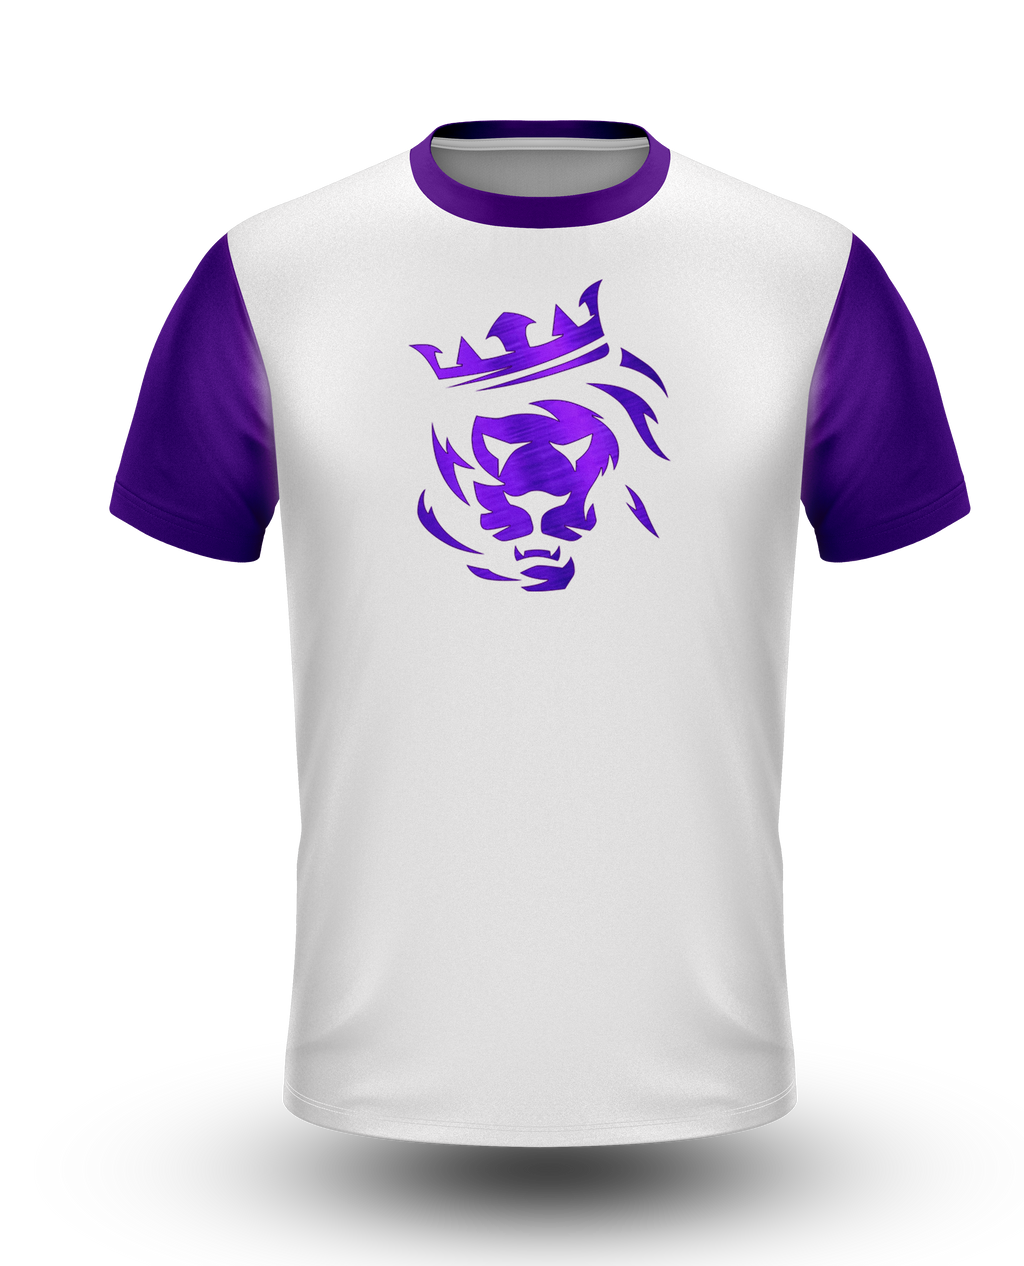 EMPIRE Gaming Pro Jersey – Sector Six Apparel